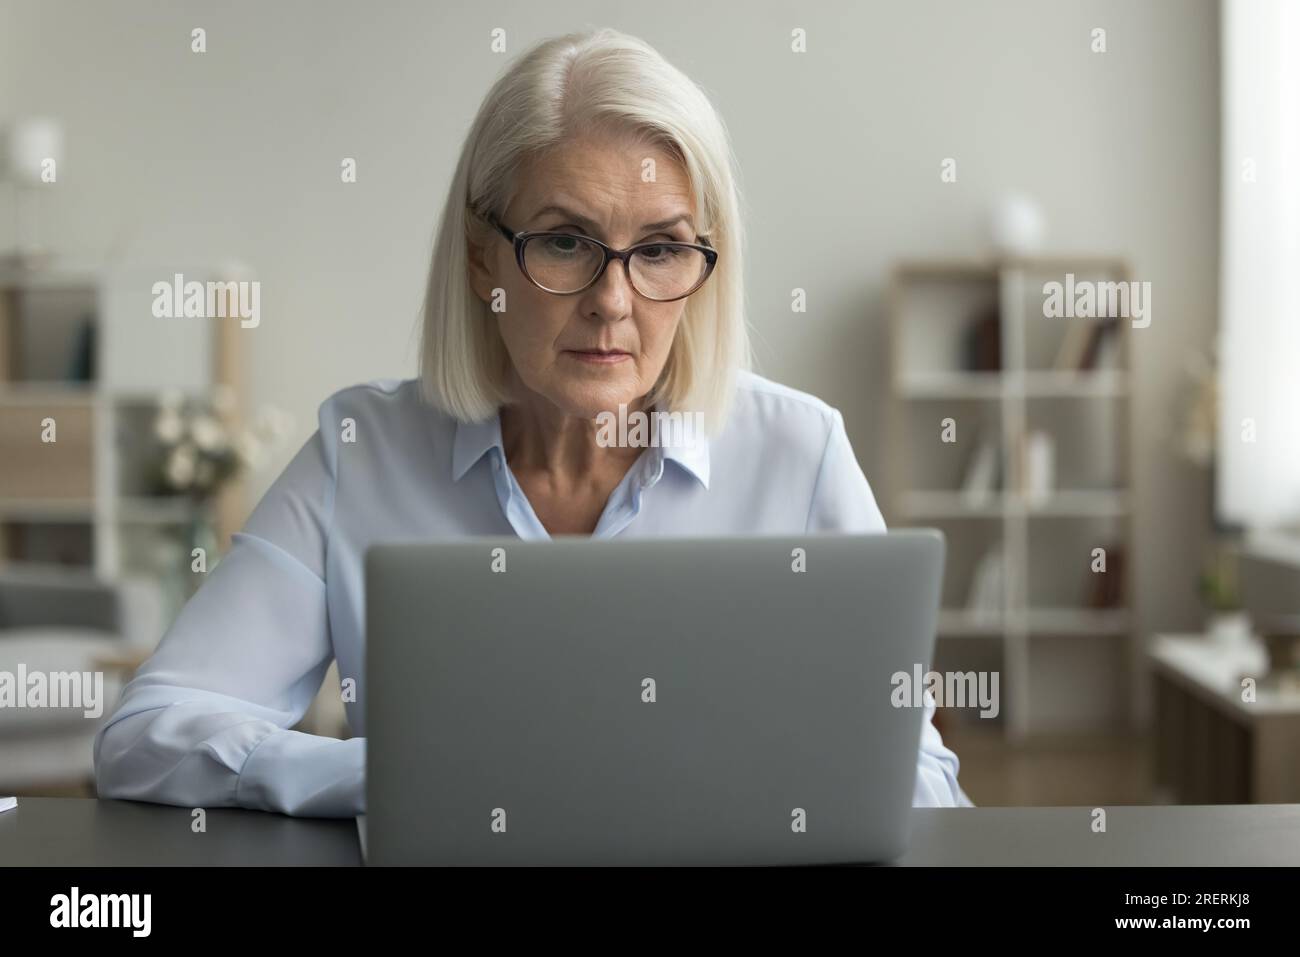 Serious mature business woman in glasses working at laptop Stock Photo